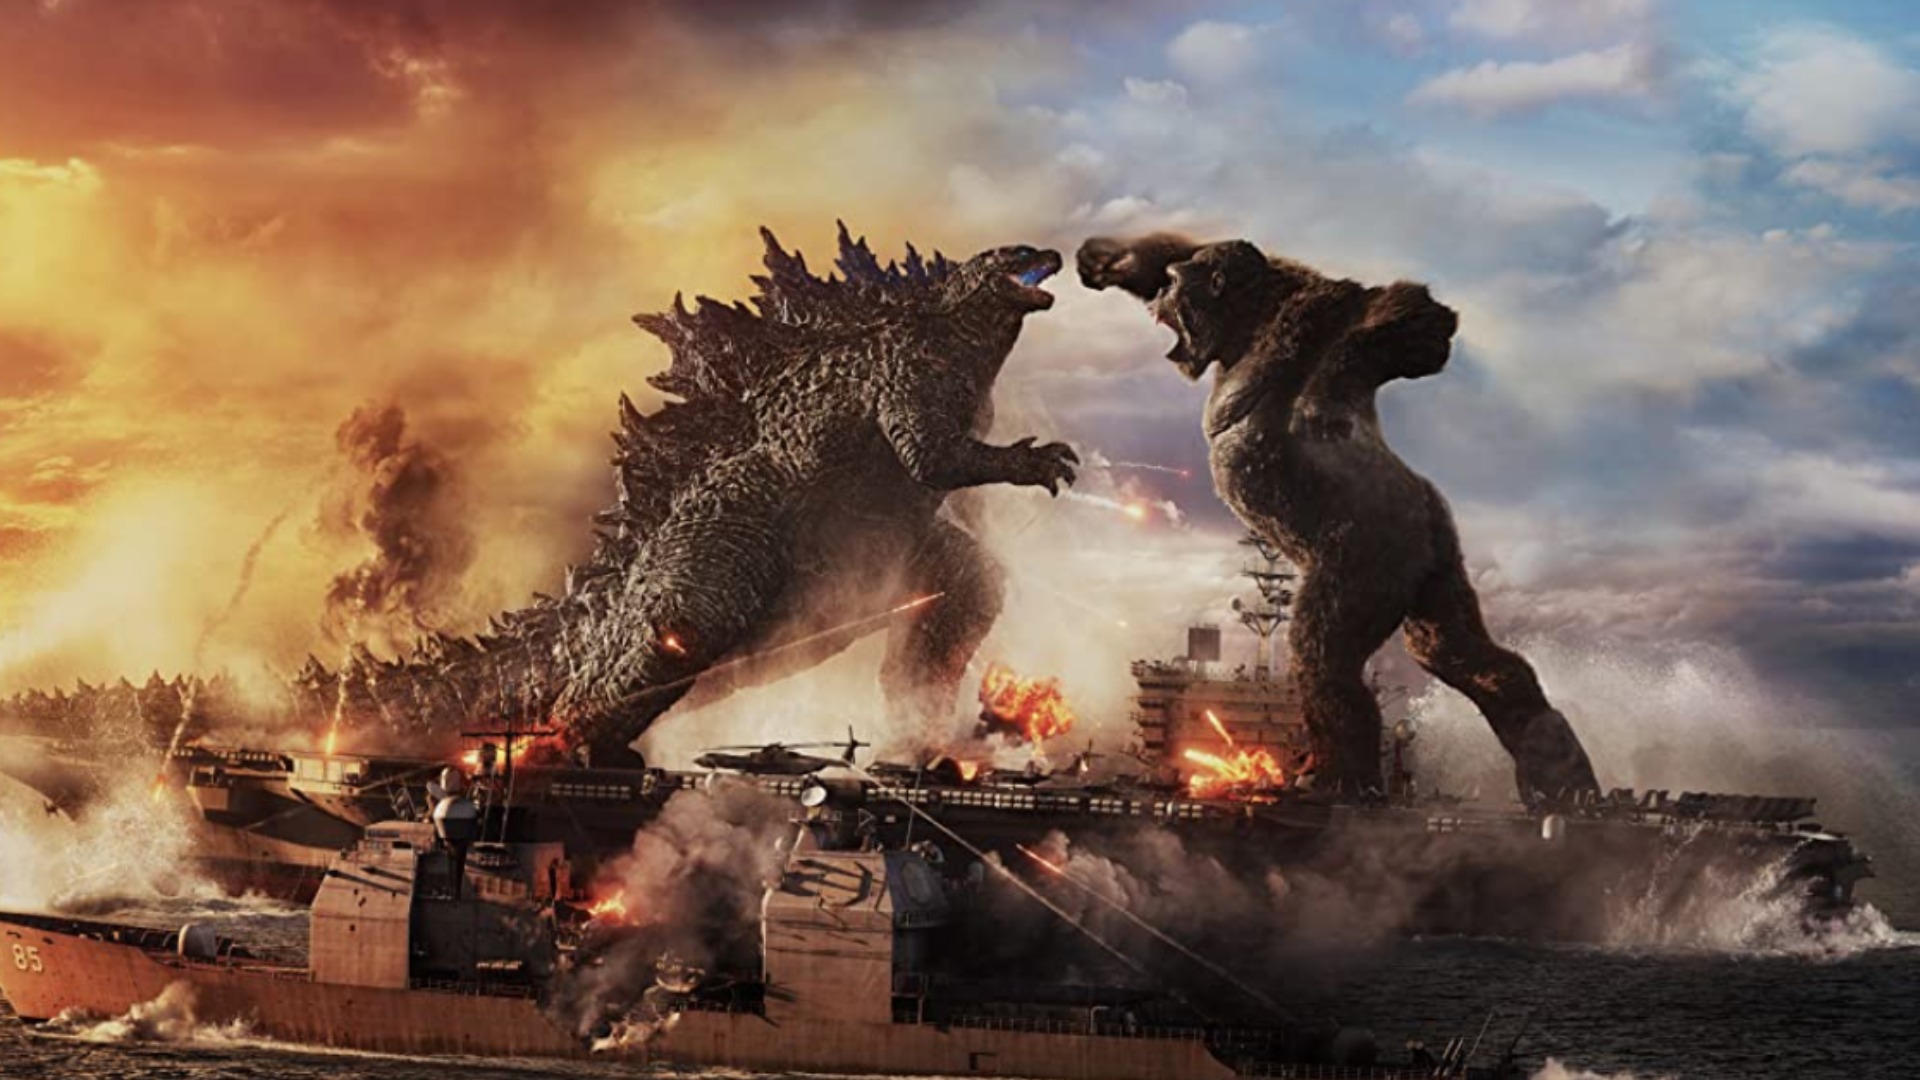 Call of Duty Warzone Godzilla crossover is becoming the worst-kept secret in Caldera